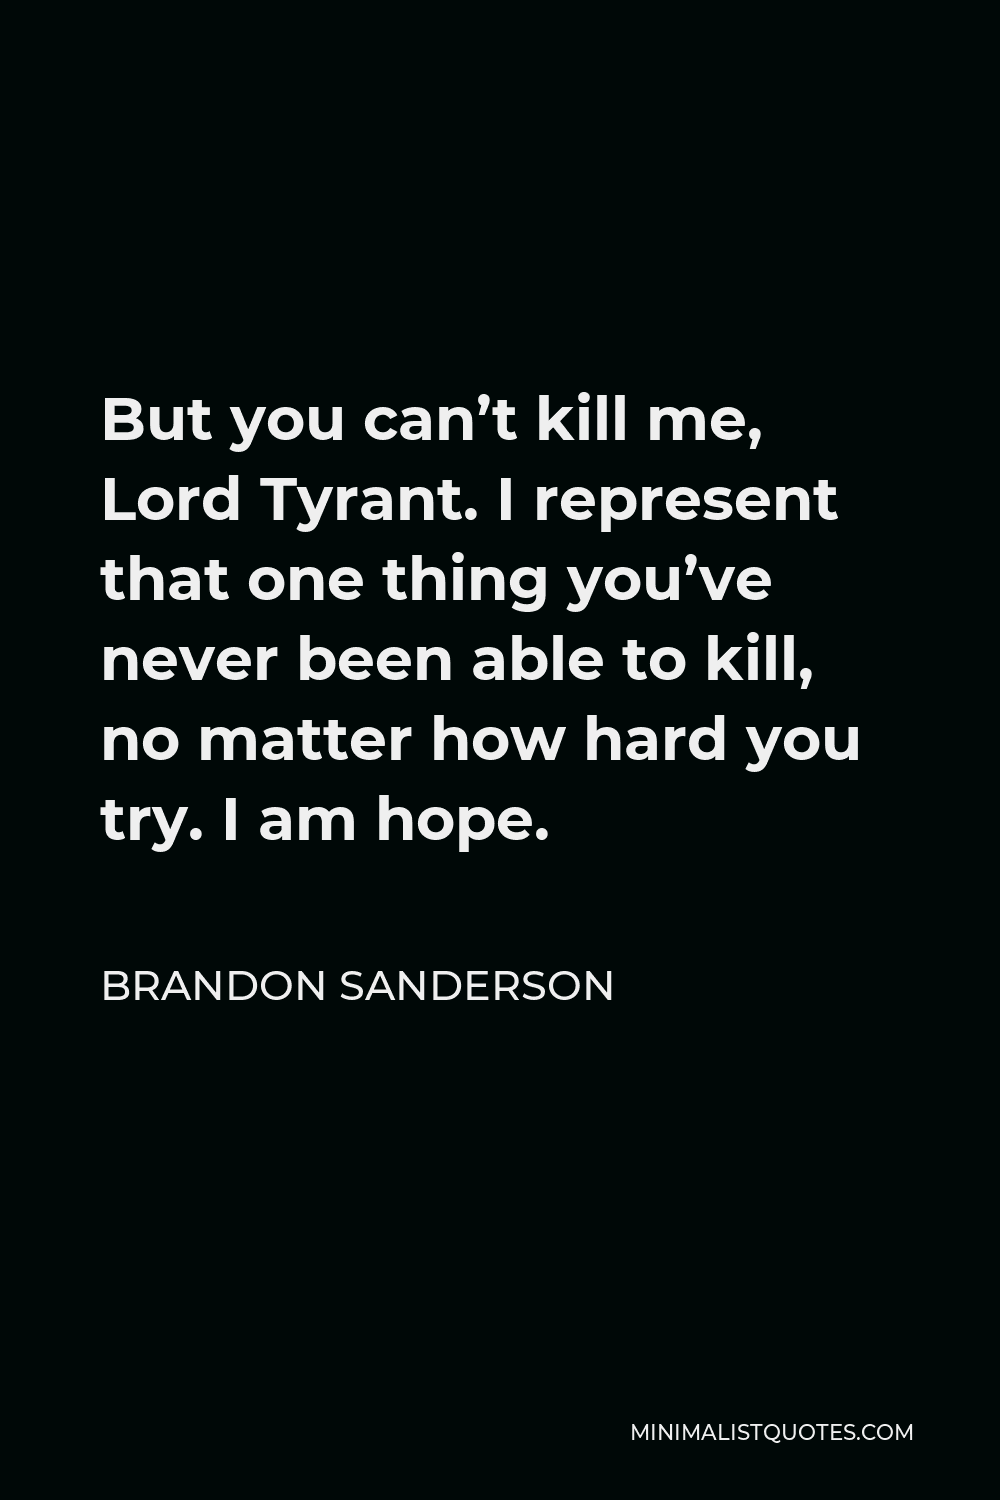 Brandon Sanderson Quote - But you can’t kill me, Lord Tyrant. I represent that one thing you’ve never been able to kill, no matter how hard you try. I am hope.